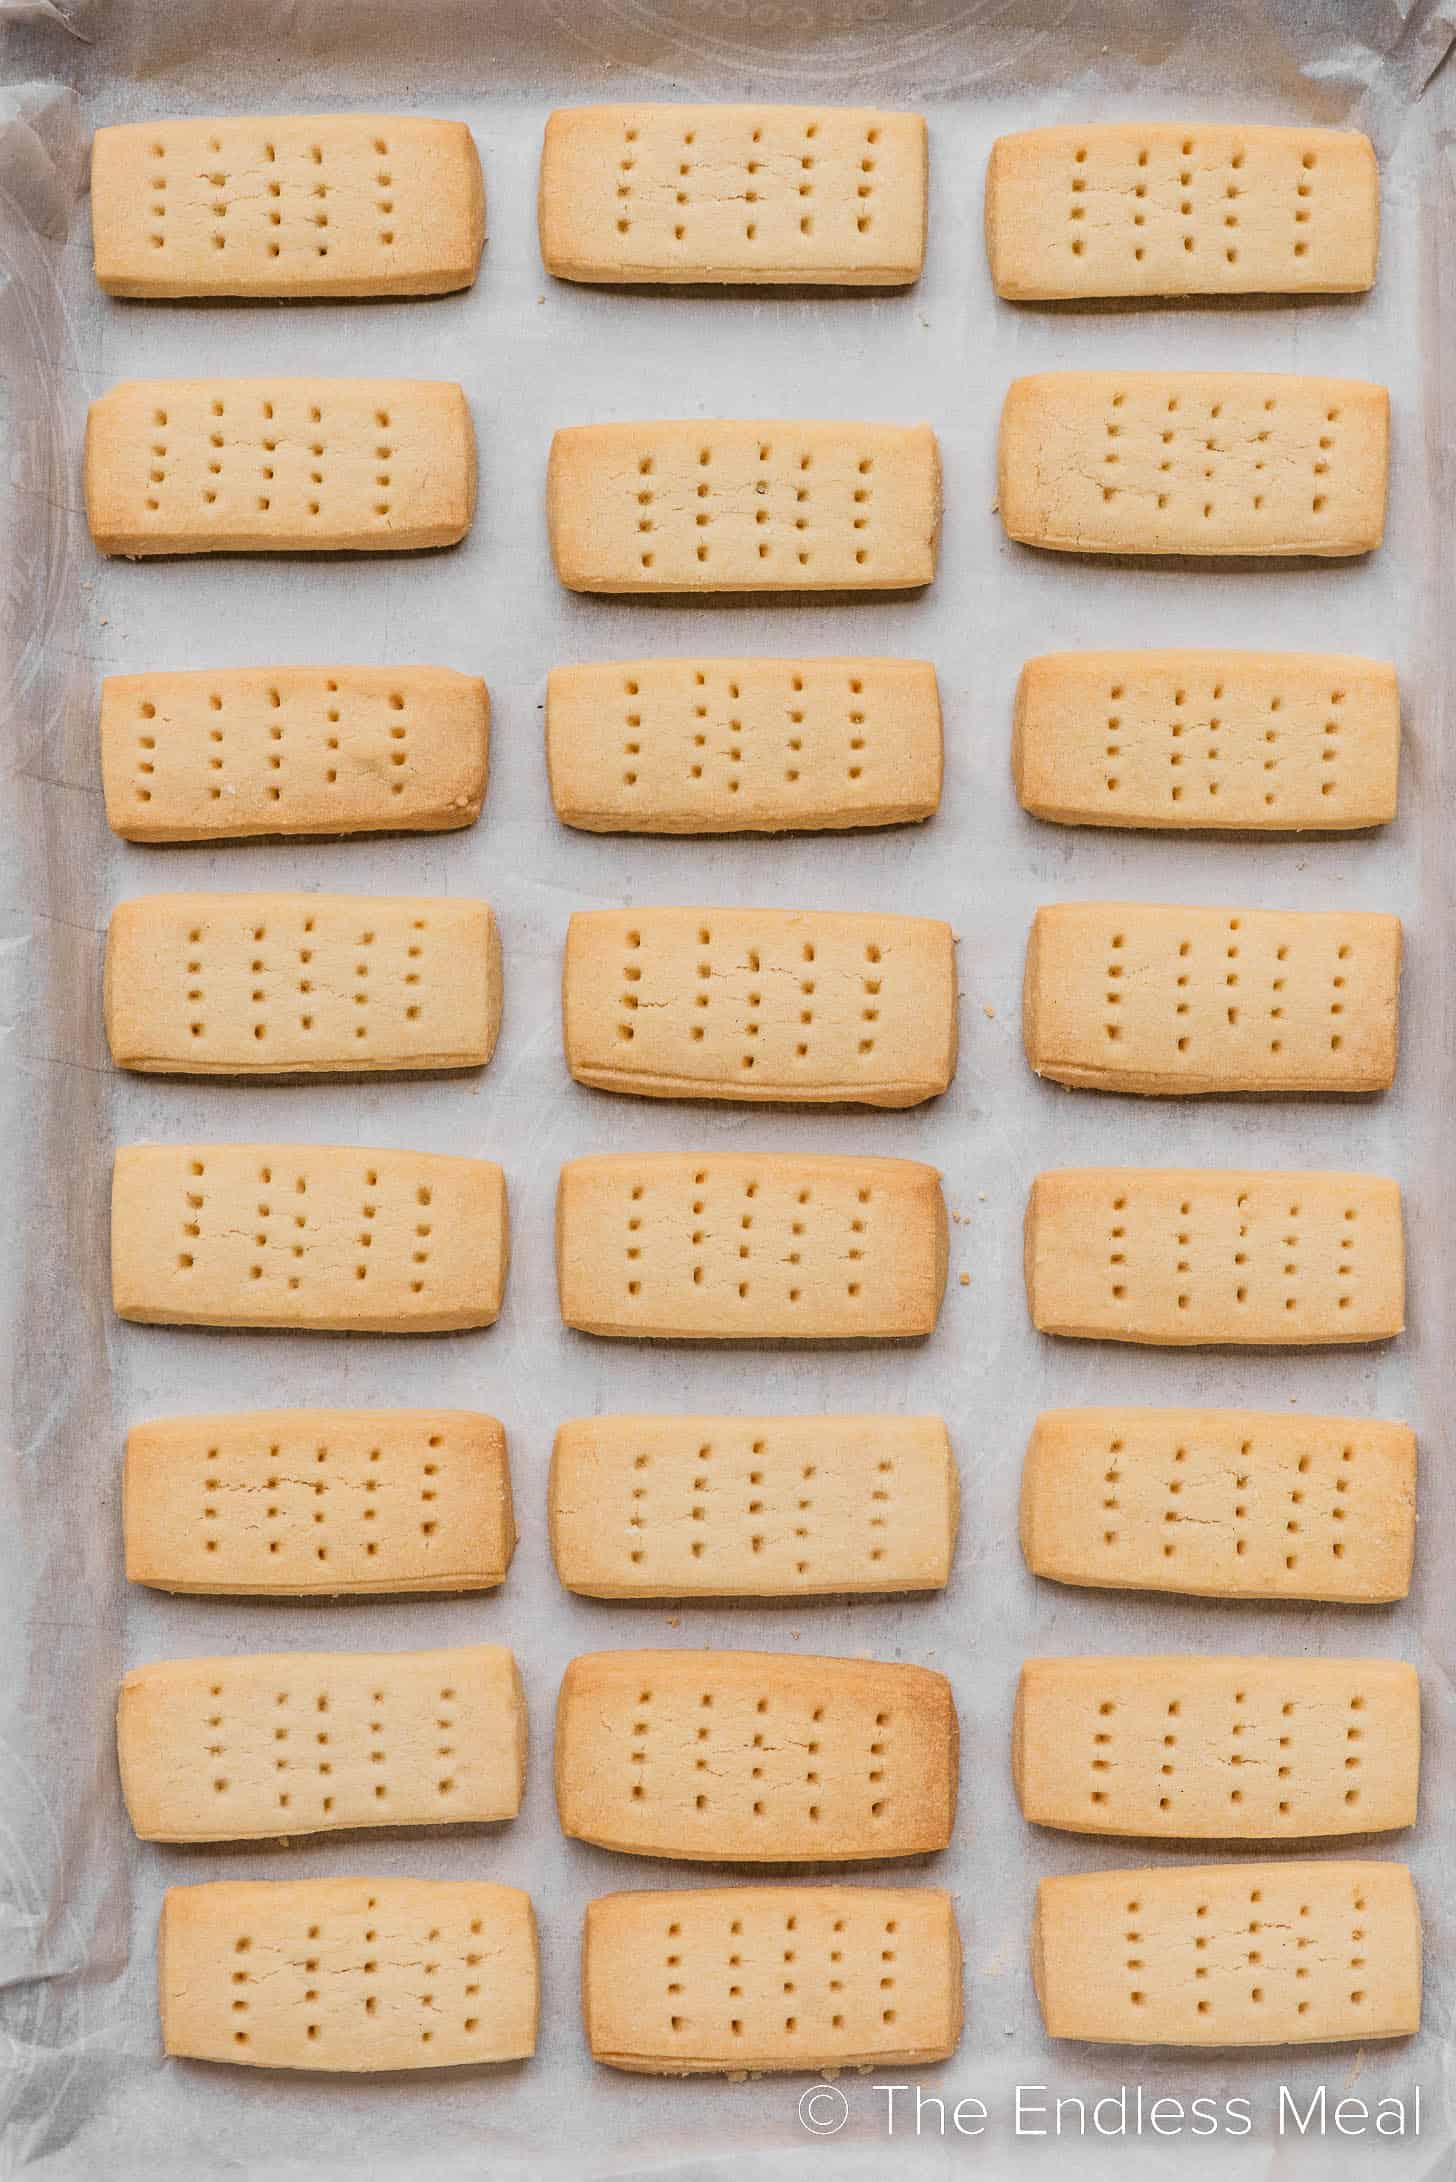 Scottish Shortbread Cookies on a baking tray